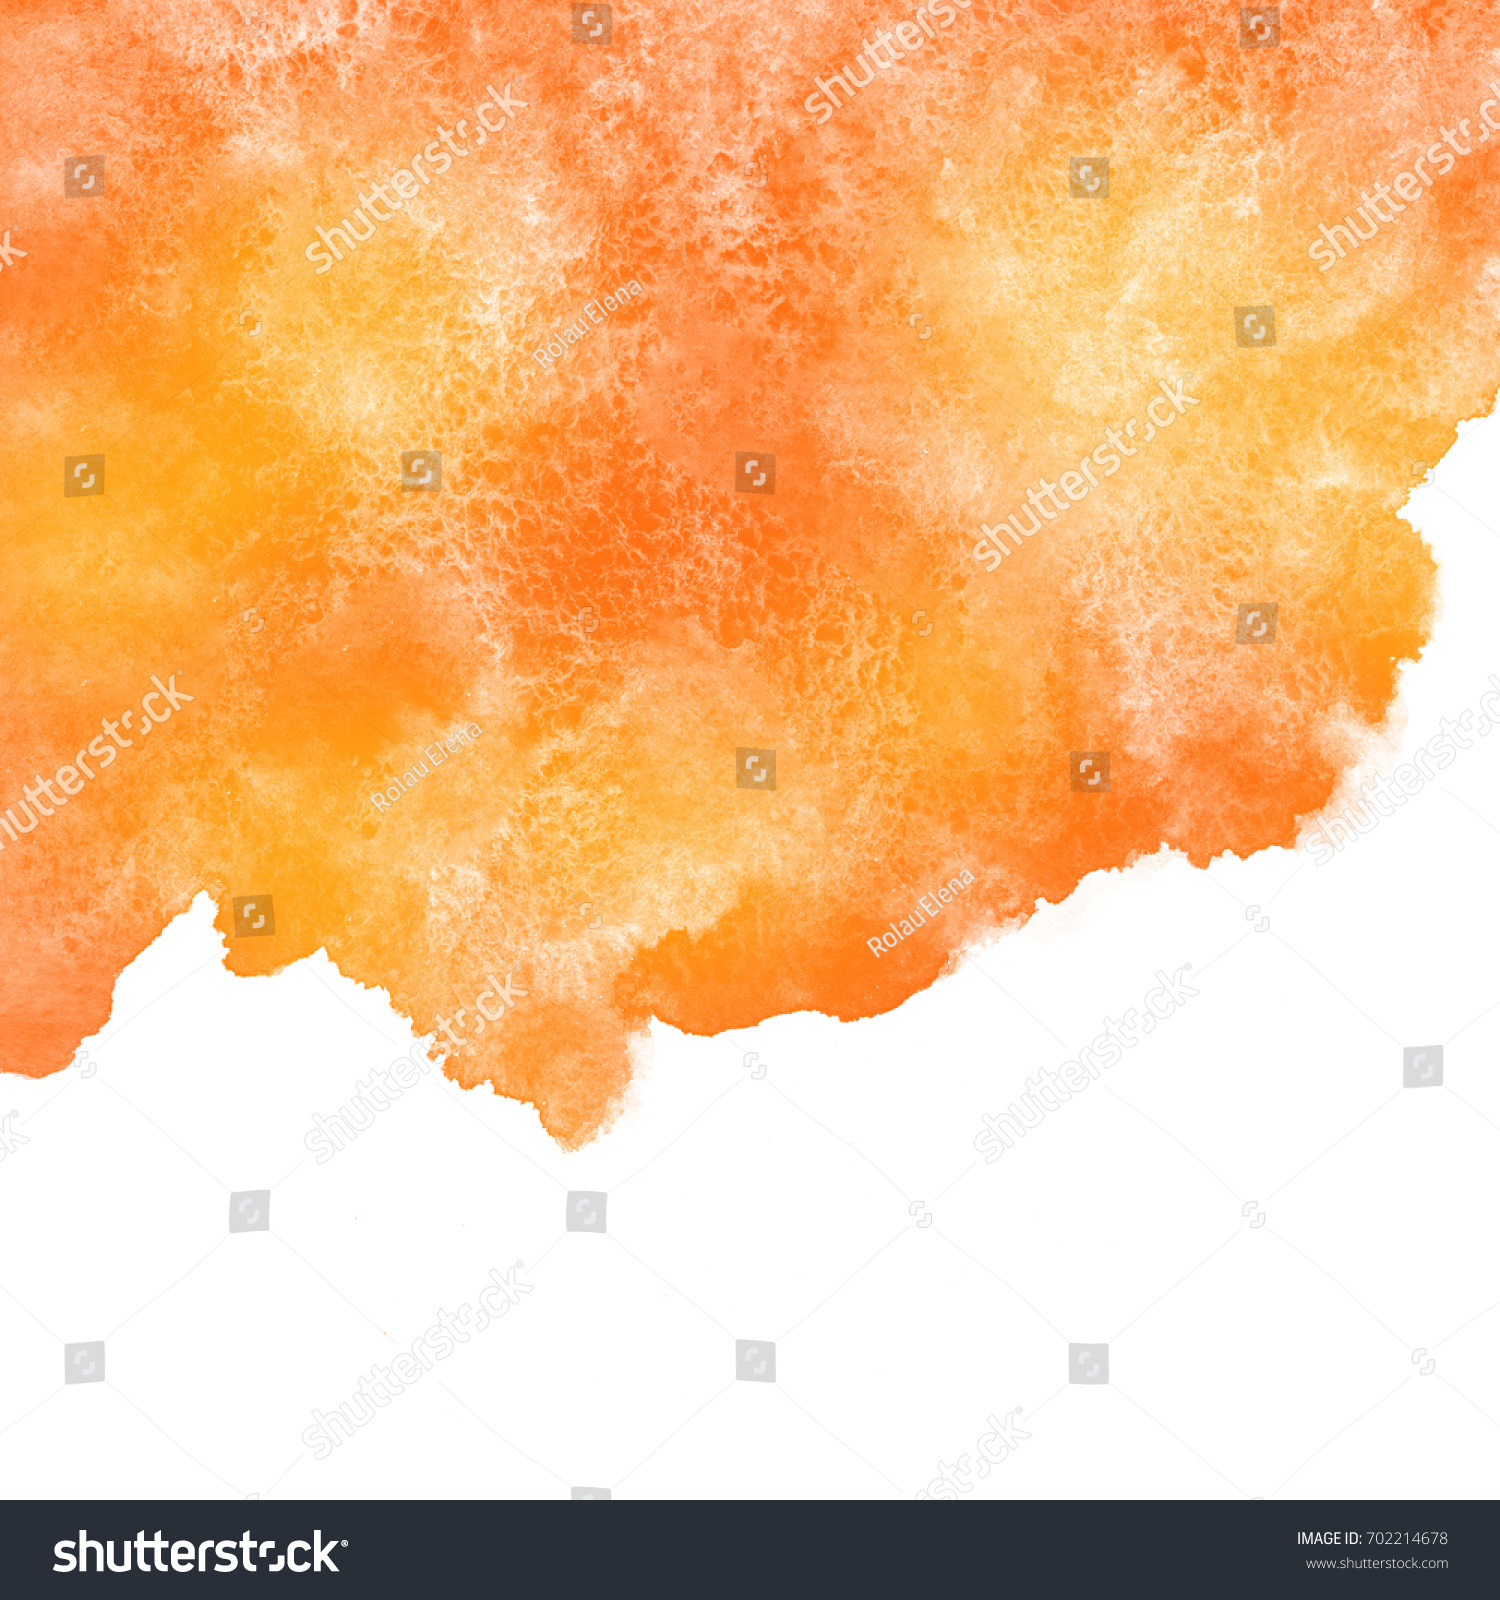 Download Autumn Fall Halloween Thanksgiving Watercolor Background Stock Illustration 702214678